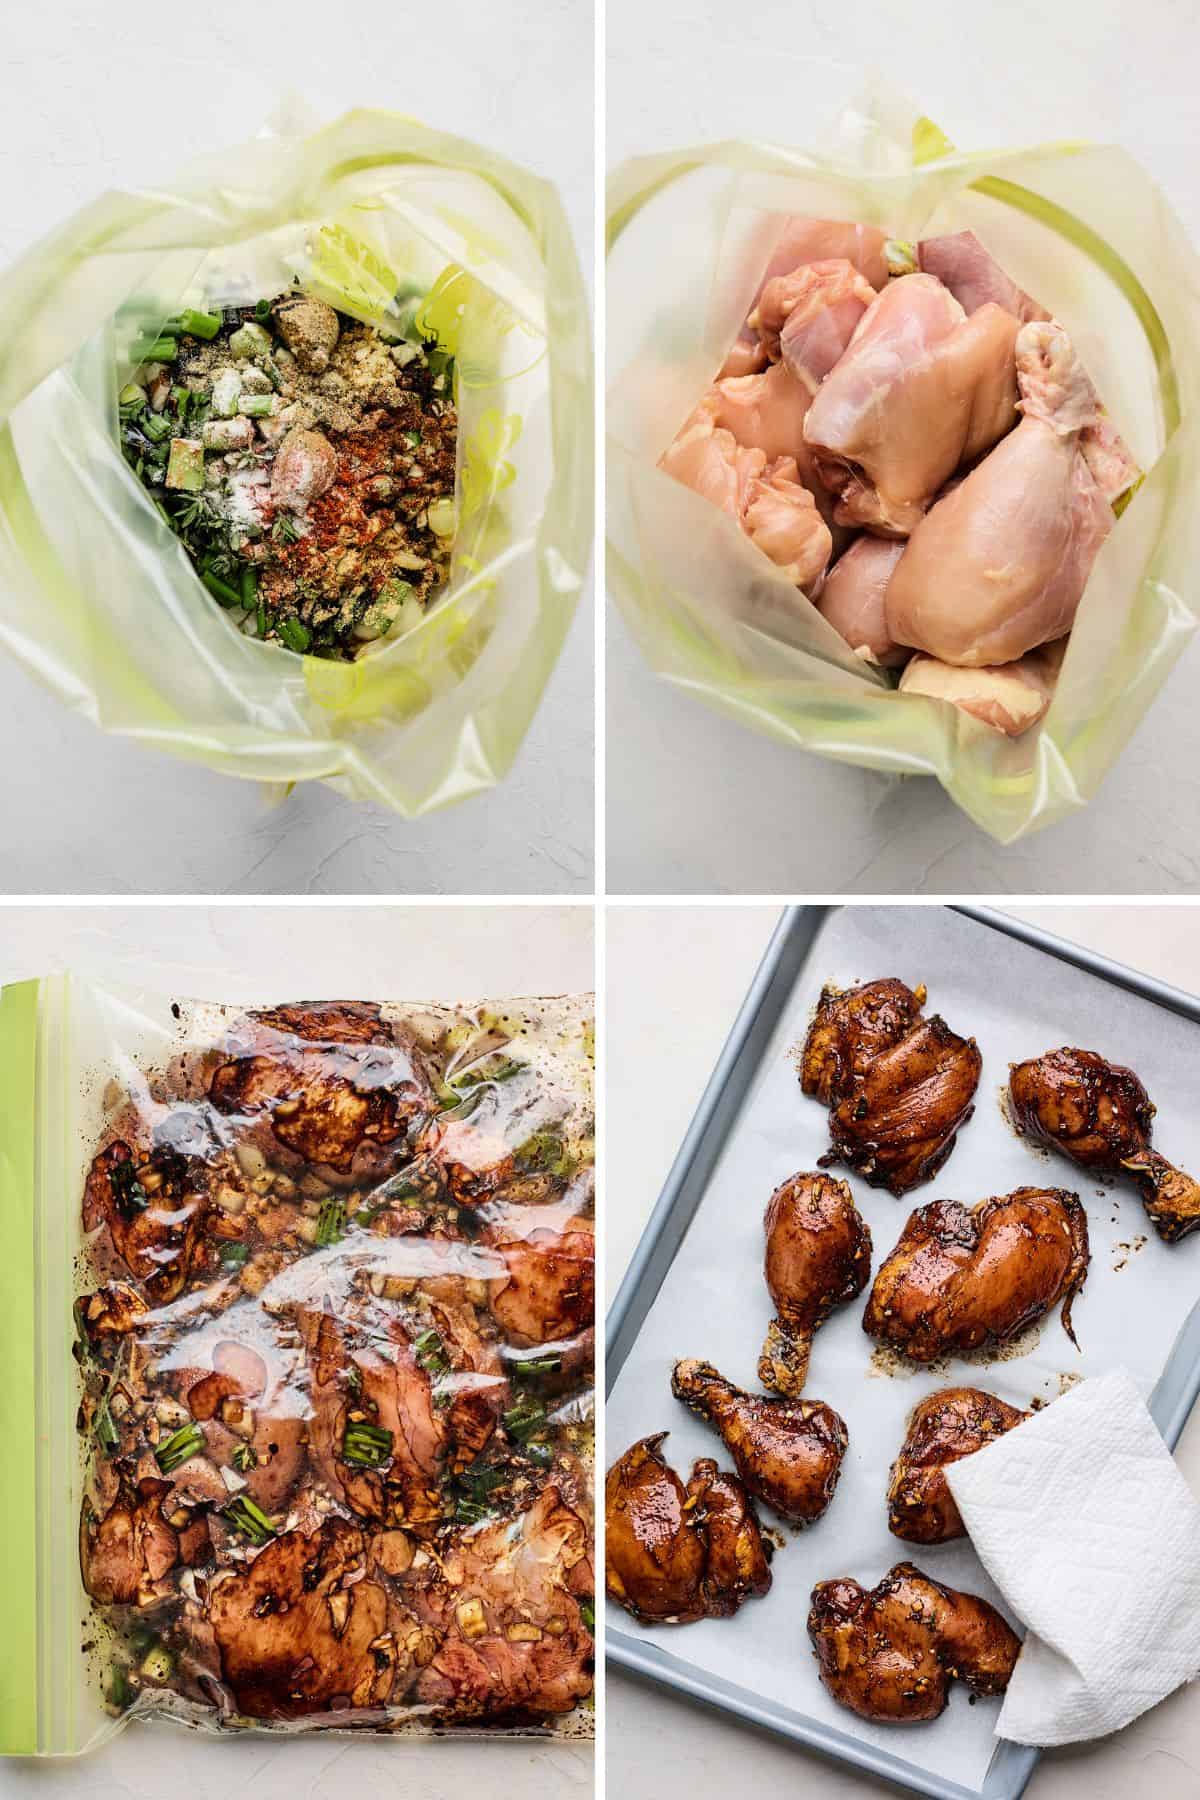 Collage of images showing the steps to make jamaican brown stew chicken, including marinating the chicken with vegetables, herbs and spices in bags, and letting it rest after marinating